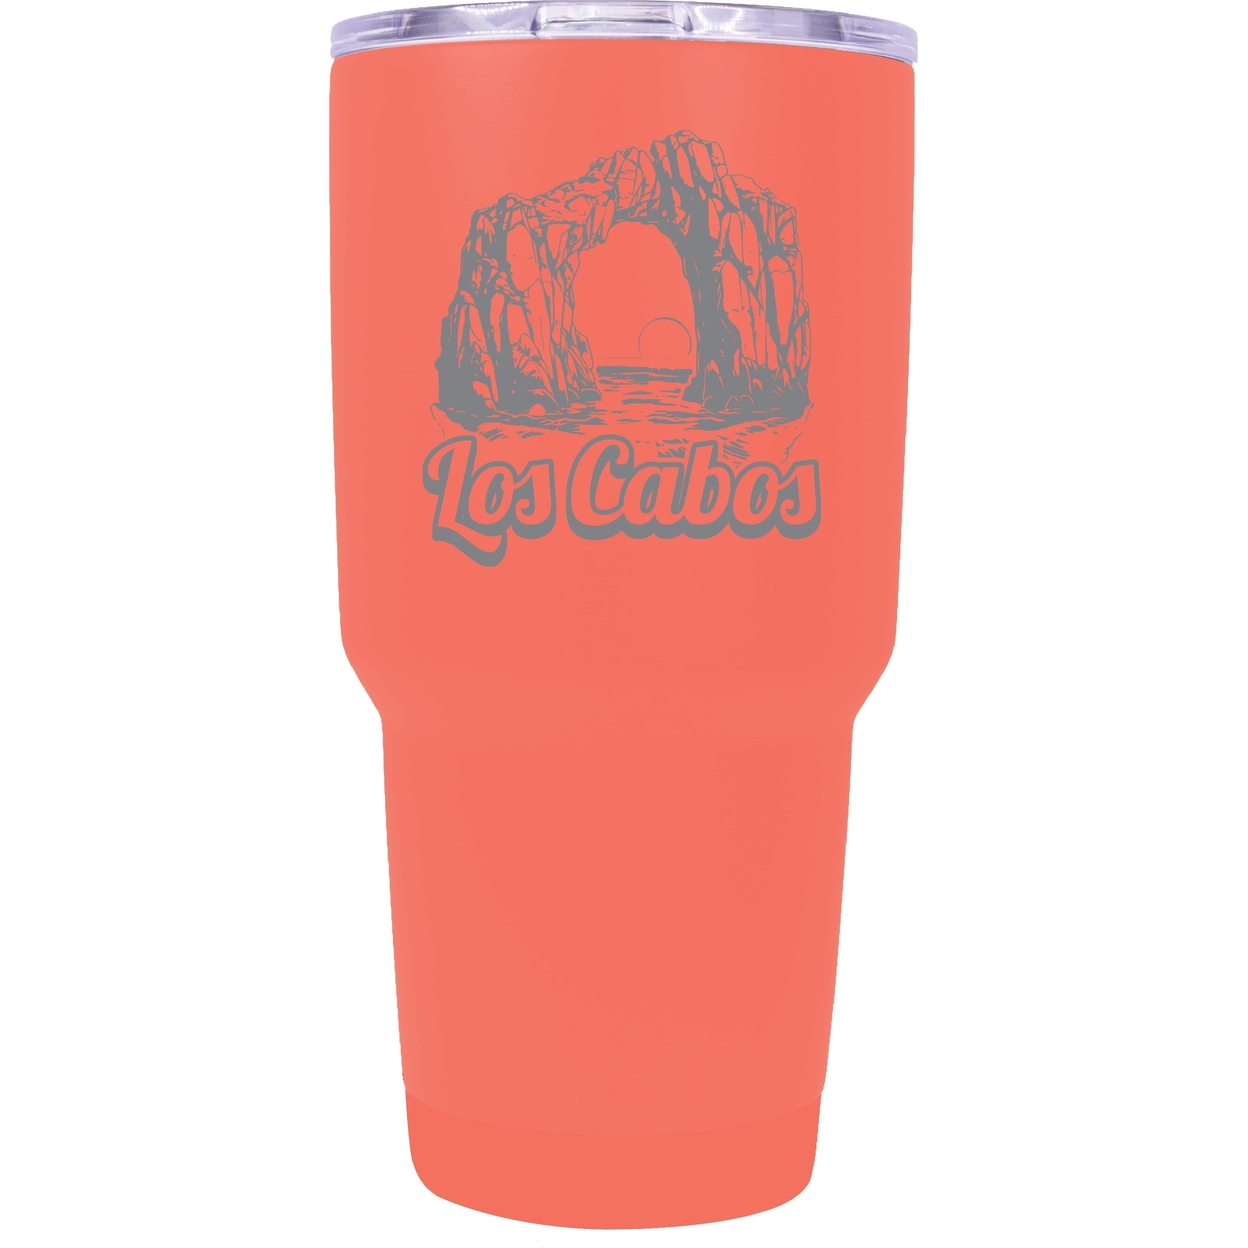 Los Cabos Mexico Souvenir 24 Oz Engraved Insulated Stainless Steel Tumbler - Coral,,4-Pack